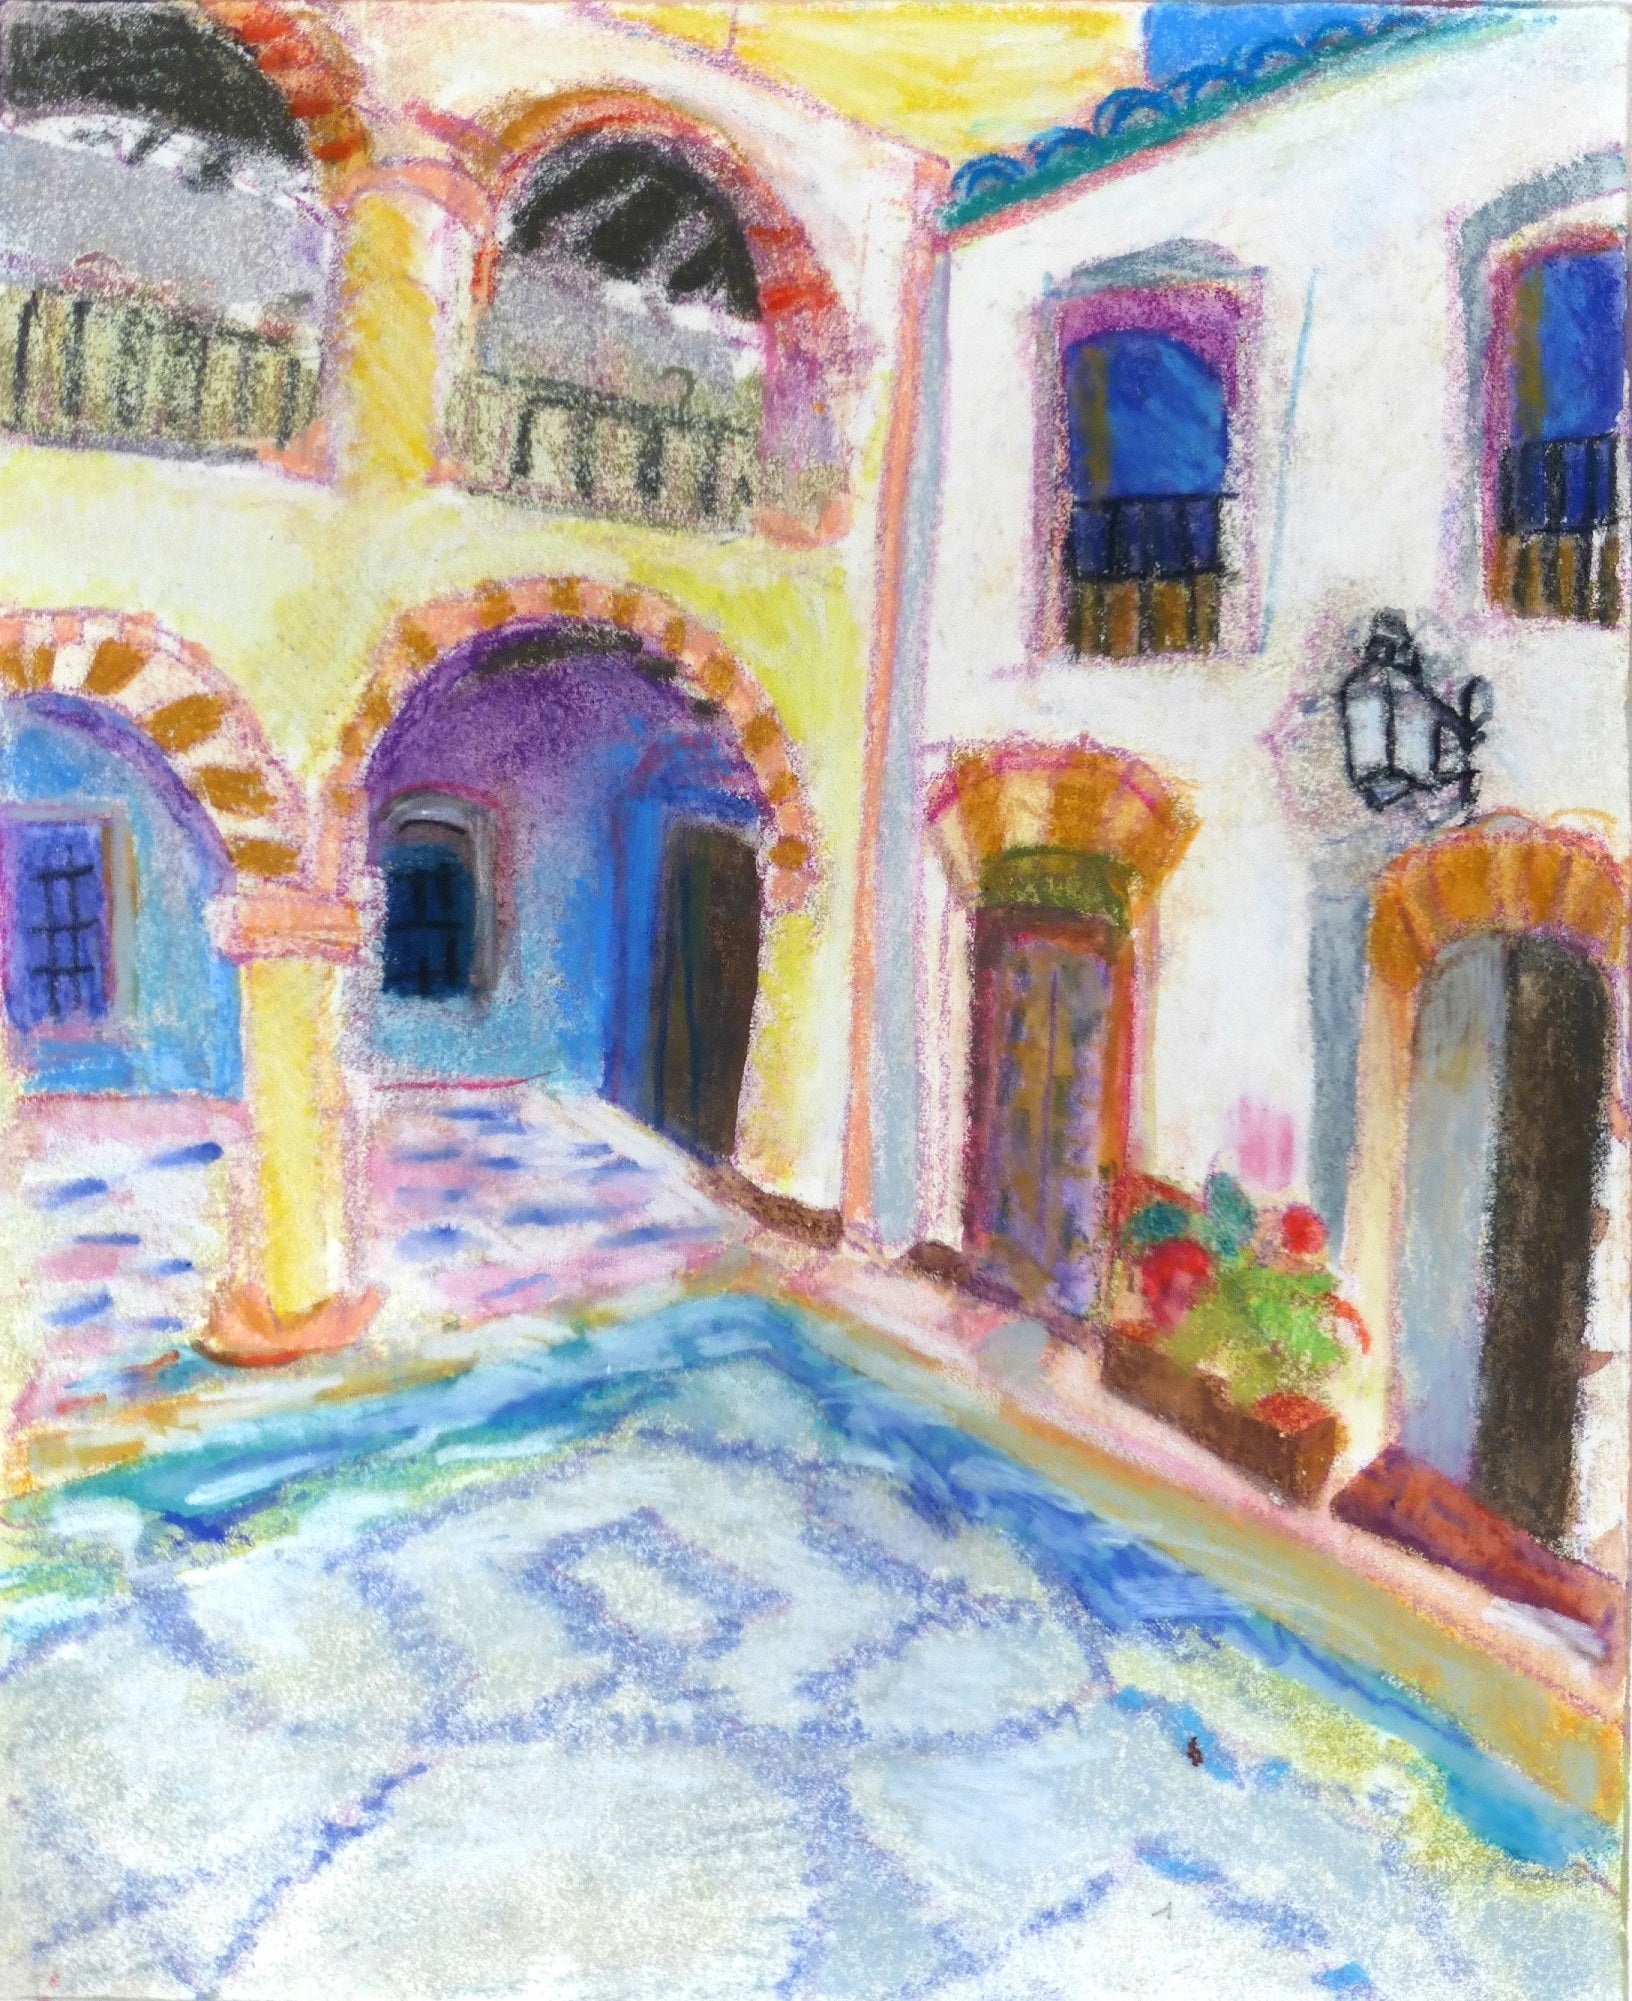 'COURTYARD WITH BLUE MOSAICS' - Handmade Original Monoprint with Watercolor and Pencil